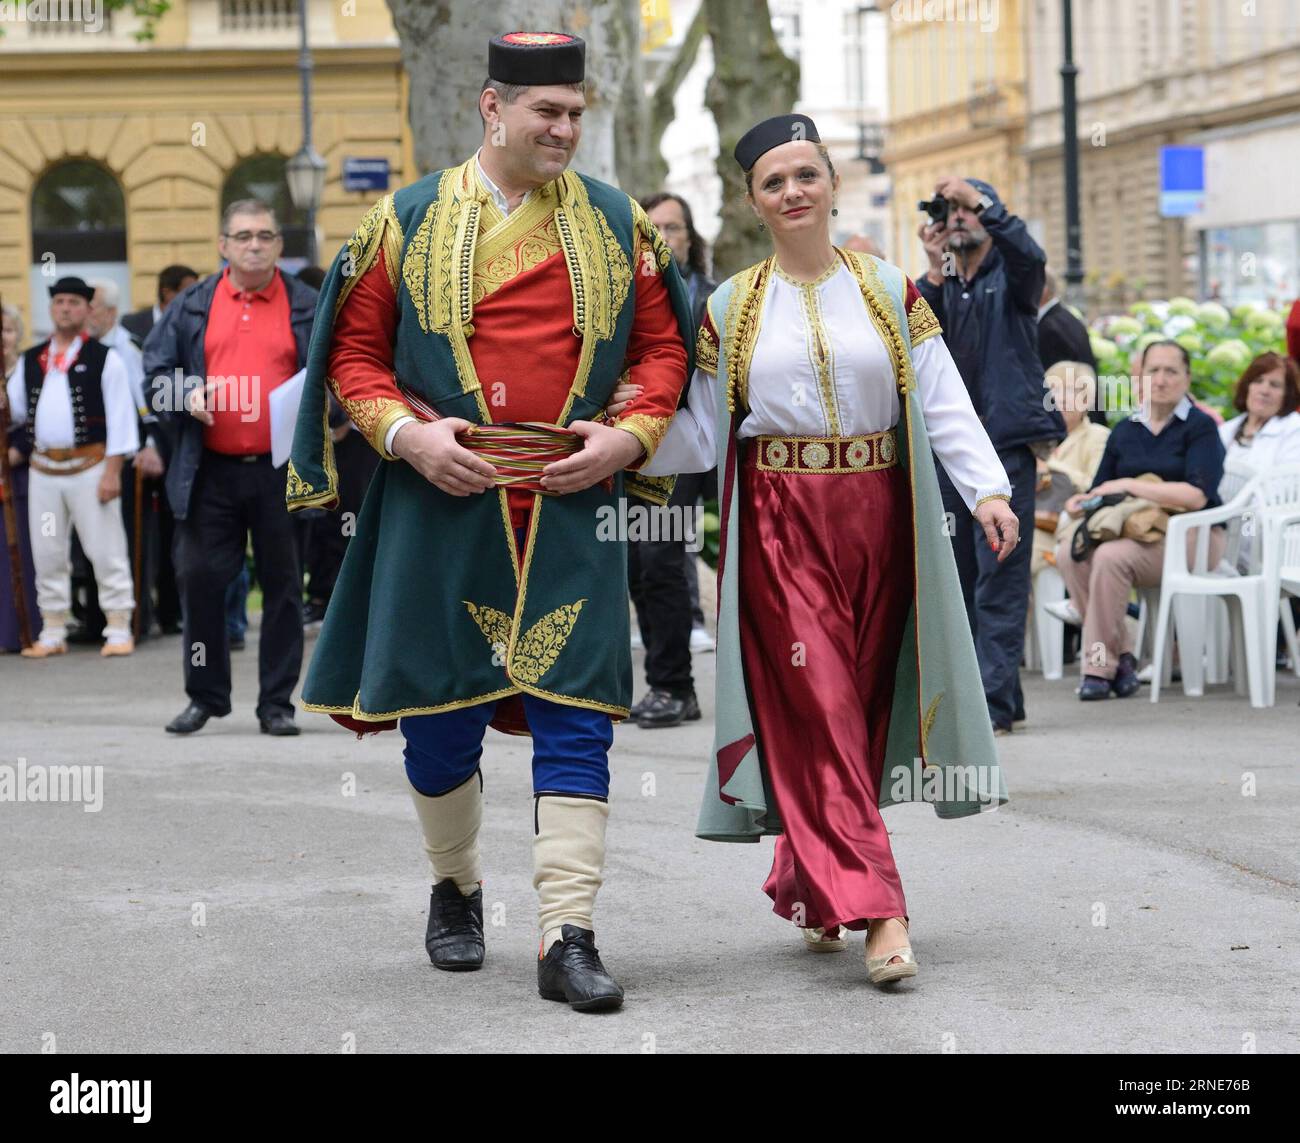 https://c8.alamy.com/comp/2RNE76B/160612-zagreb-june-12-2016-participants-dressed-in-montenegrin-folk-costumes-perform-during-the-annual-day-of-national-minorities-at-zrinjevac-park-in-zagreb-croatia-june-12-2016-members-of-18-national-minorities-settled-in-croatia-presented-their-traditional-customs-food-and-folklore-to-tourists-and-locals-on-sunday-croatia-zagreb-national-minority-day-misoxlisanin-publicationxnotxinxchn-160612-zagreb-june-12-2016-participants-dressed-in-montenegrin-folk-costumes-perform-during-the-annual-day-of-national-minorities-at-zrinjevac-park-in-zagreb-croatia-june-12-2016-members-o-2RNE76B.jpg